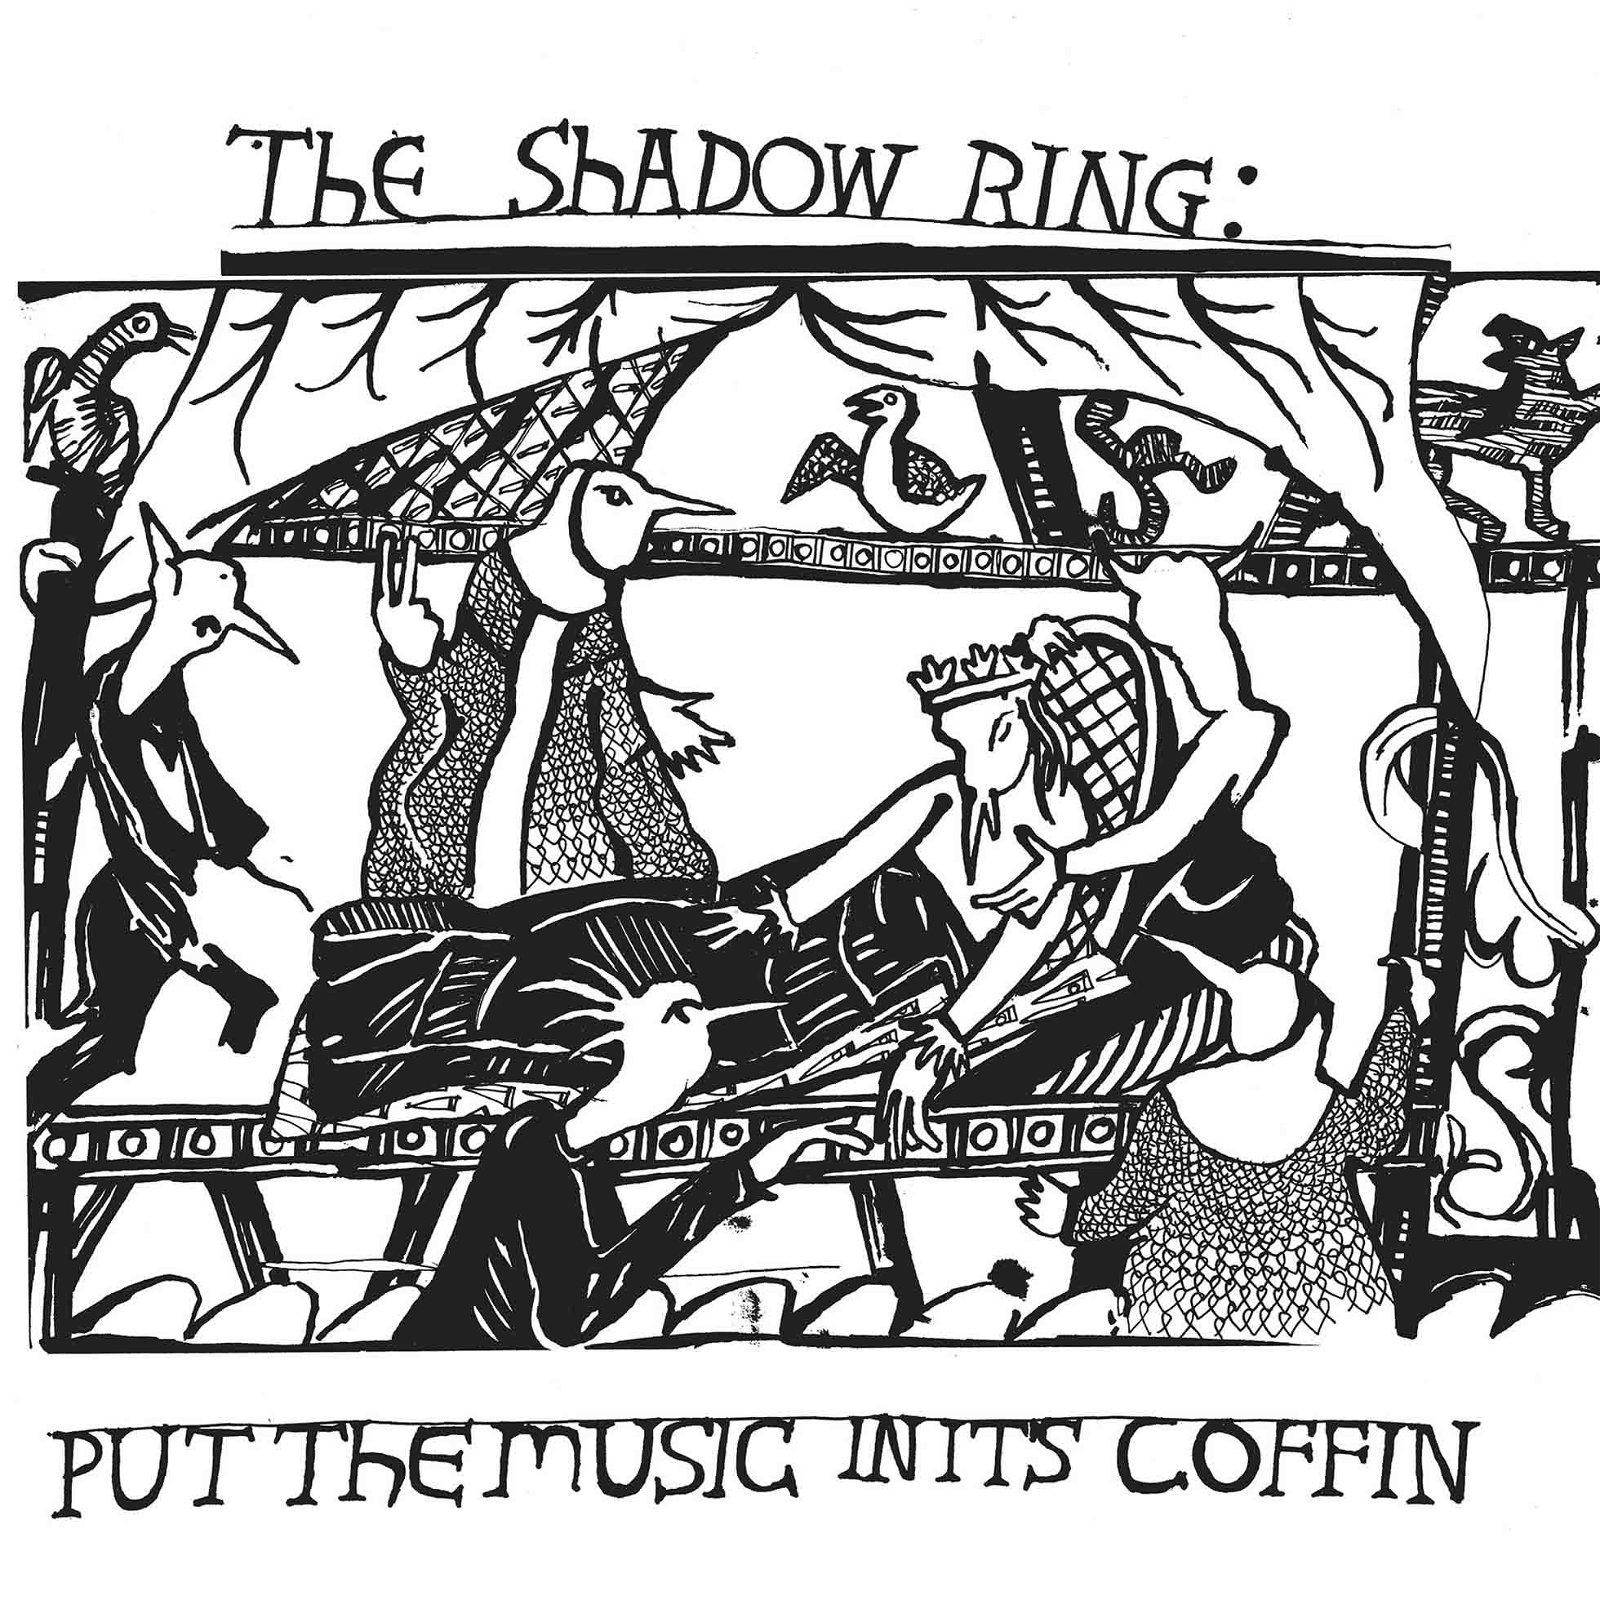 CD Shop - SHADOW RING PUT THE MUSIC IN ITS COFFIN